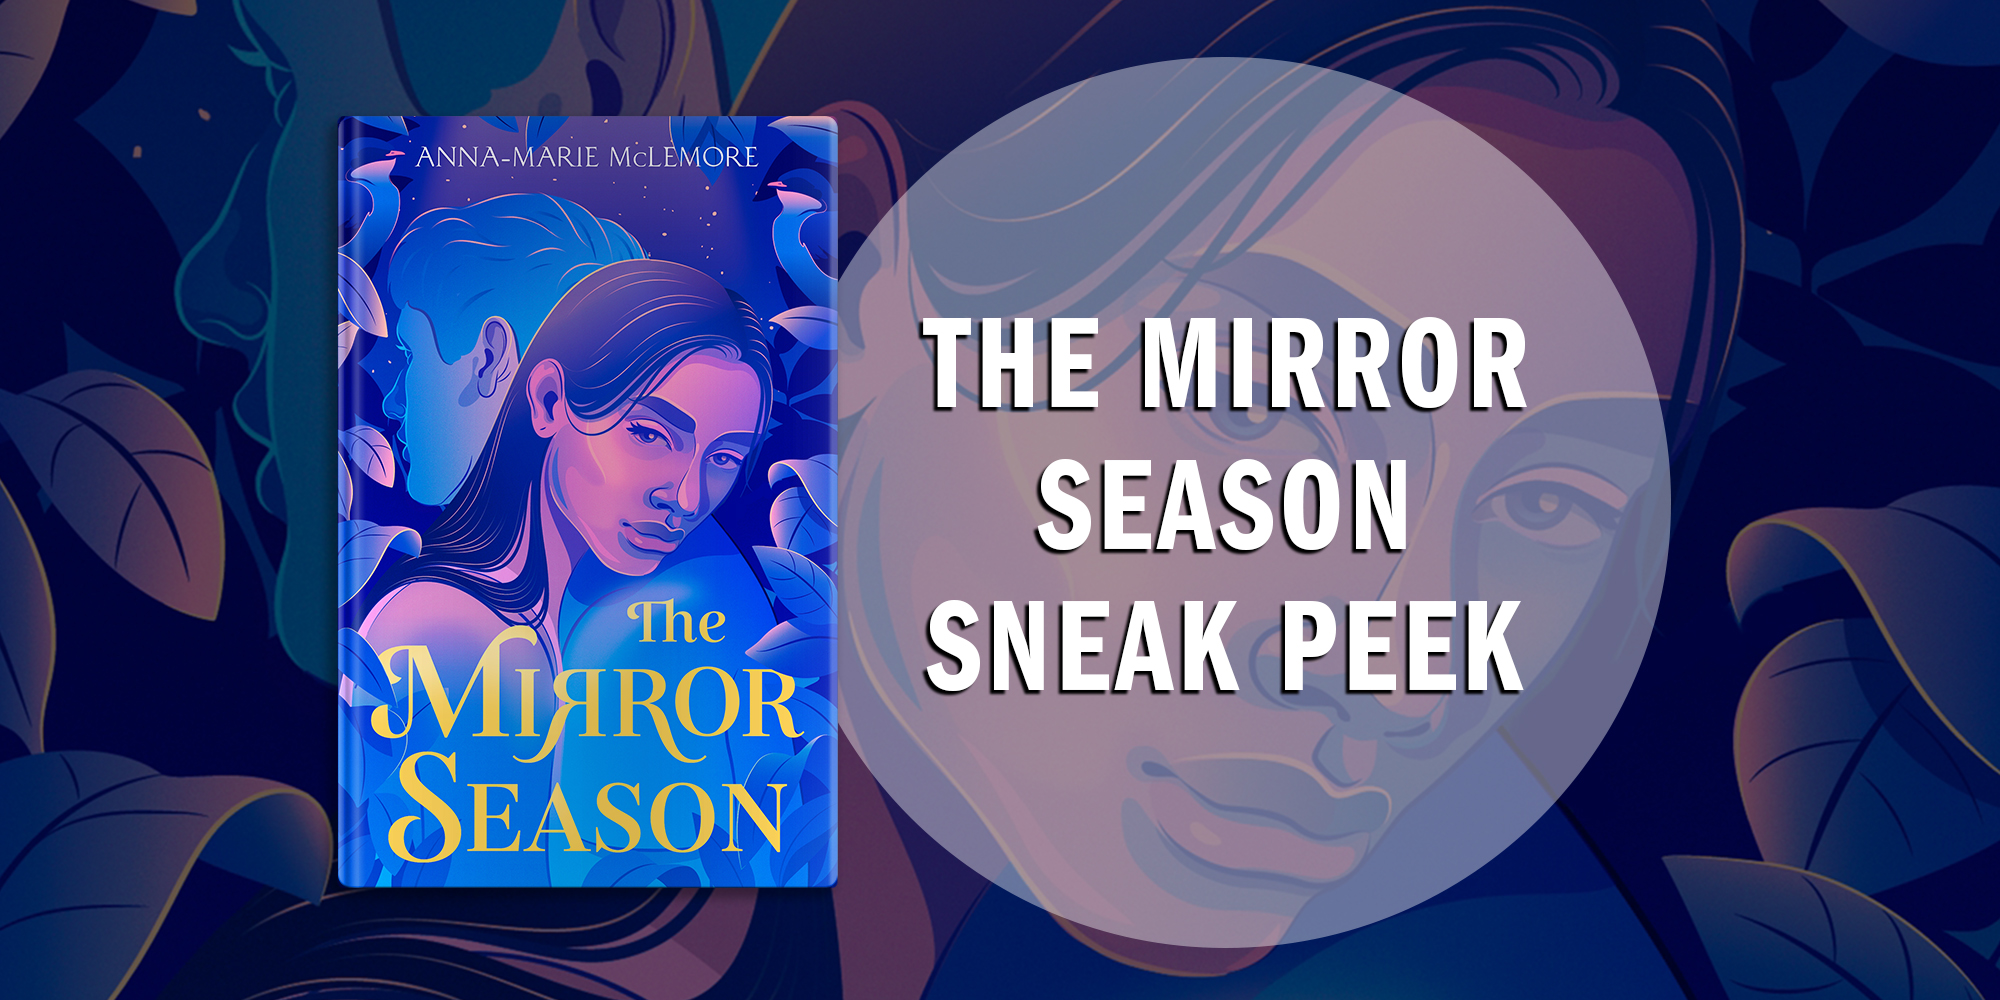 Dive Into The Mirror Season With This Unforgettable Sneak Peek